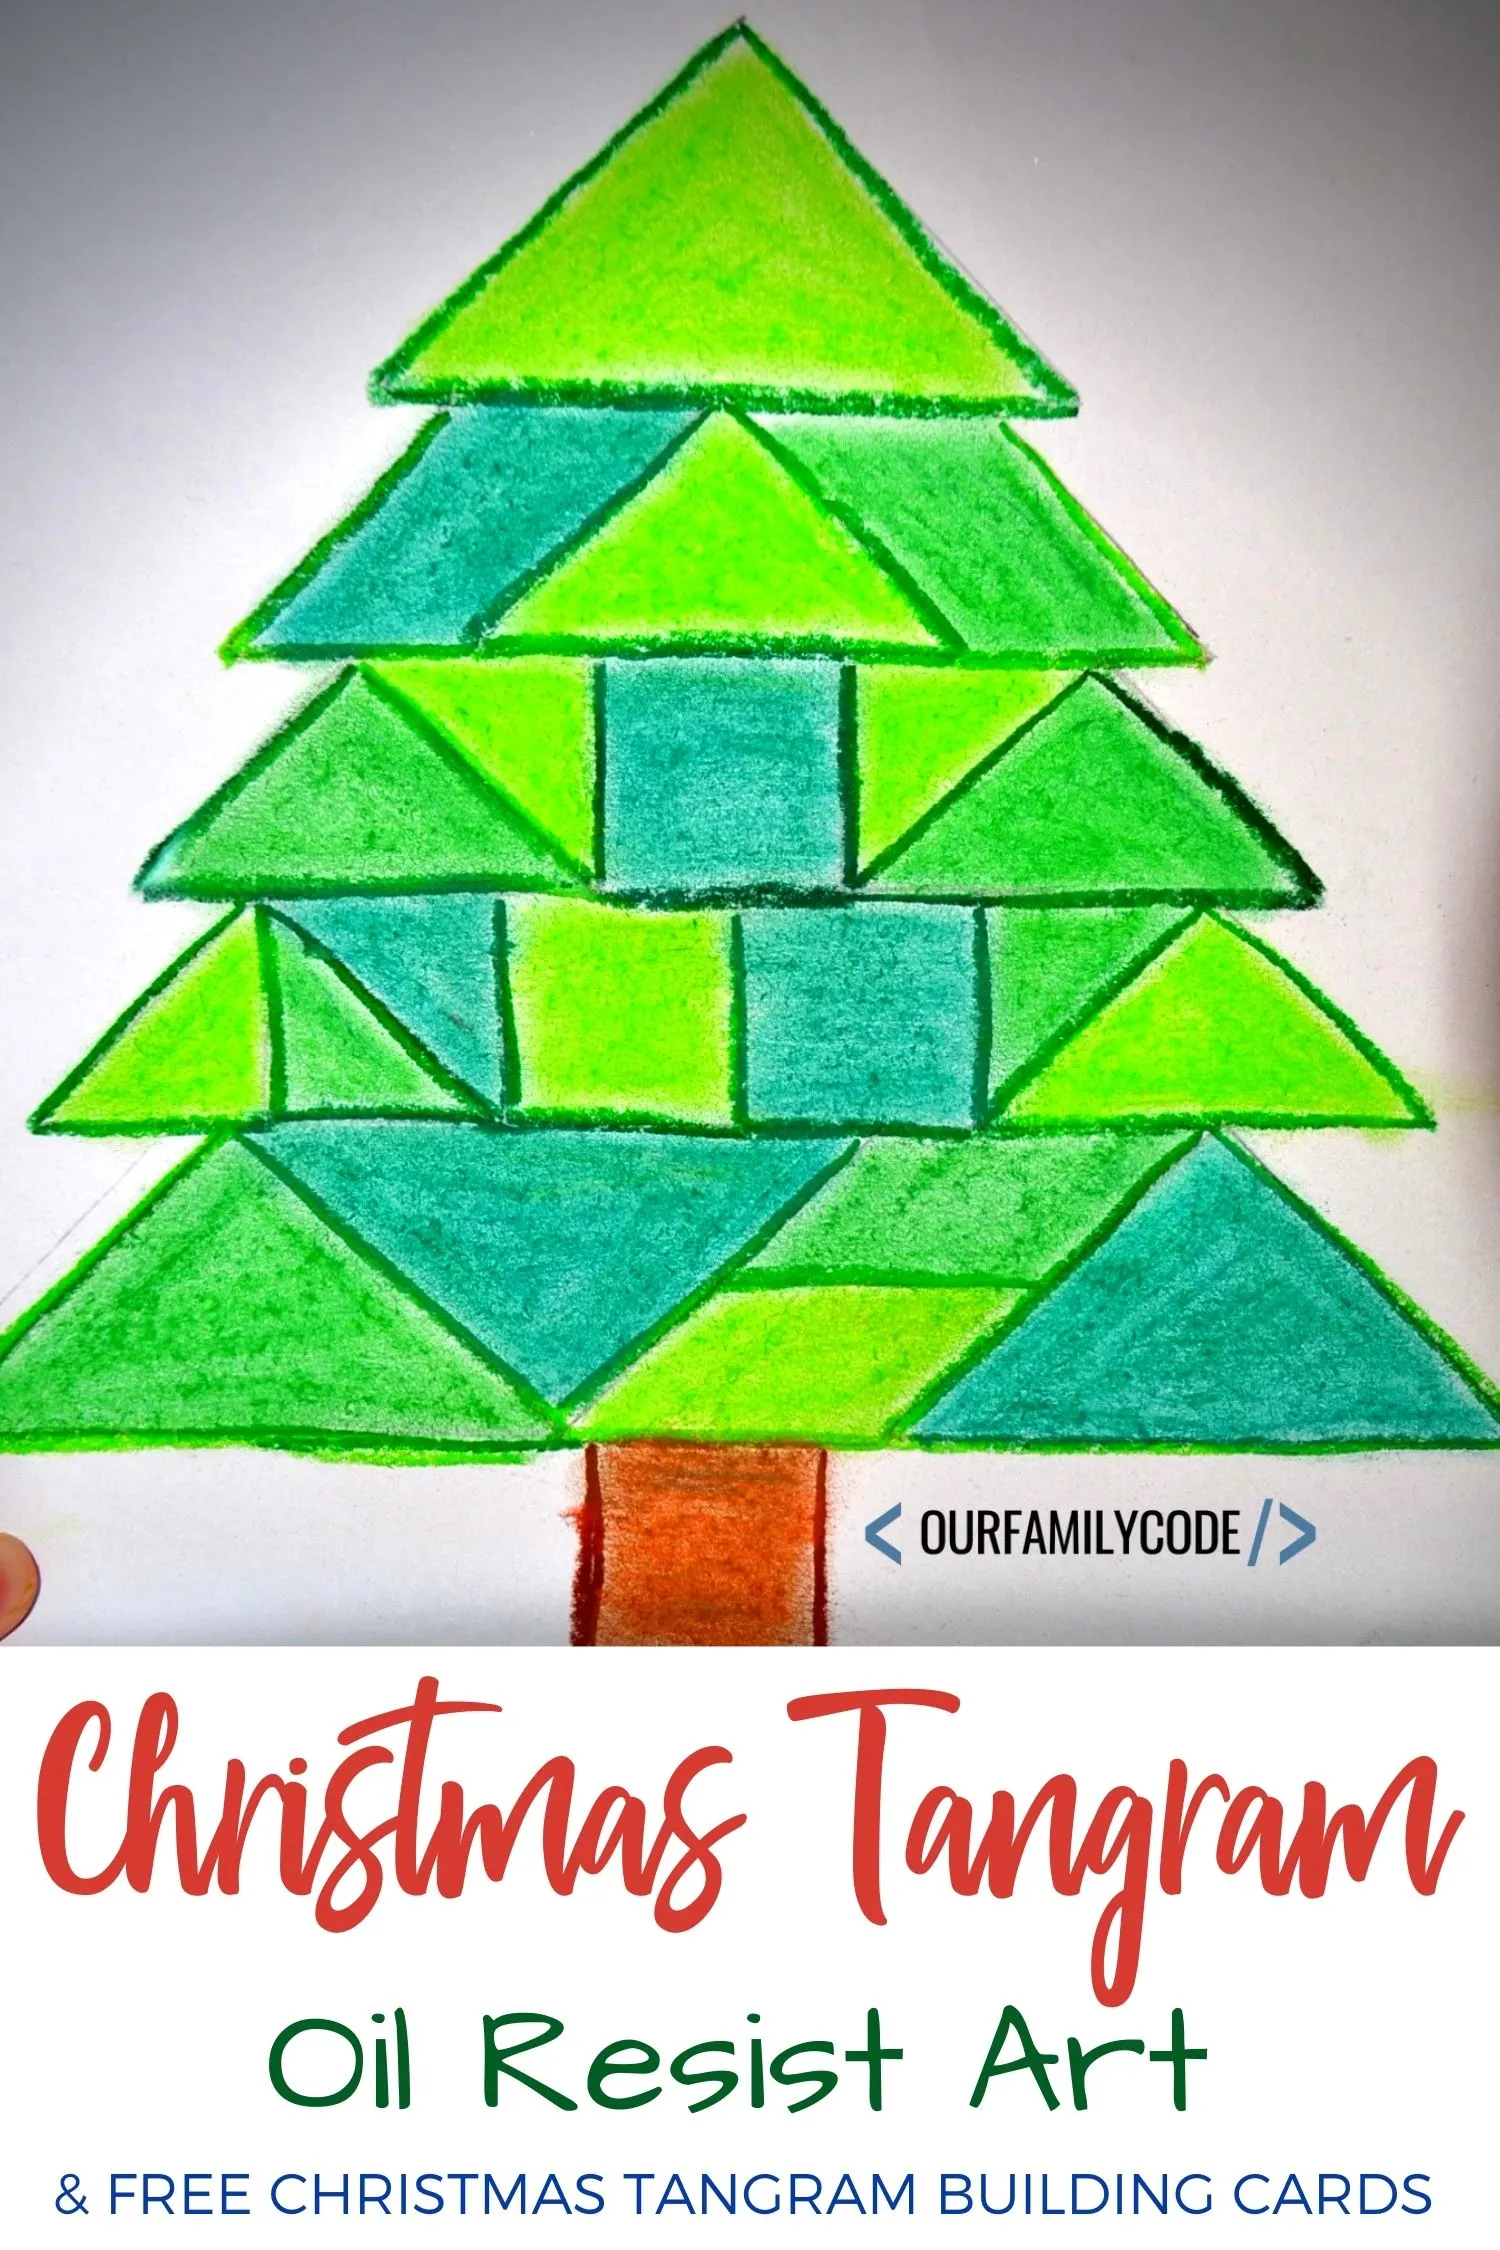 A picture of Christmas tangram oil resist art.